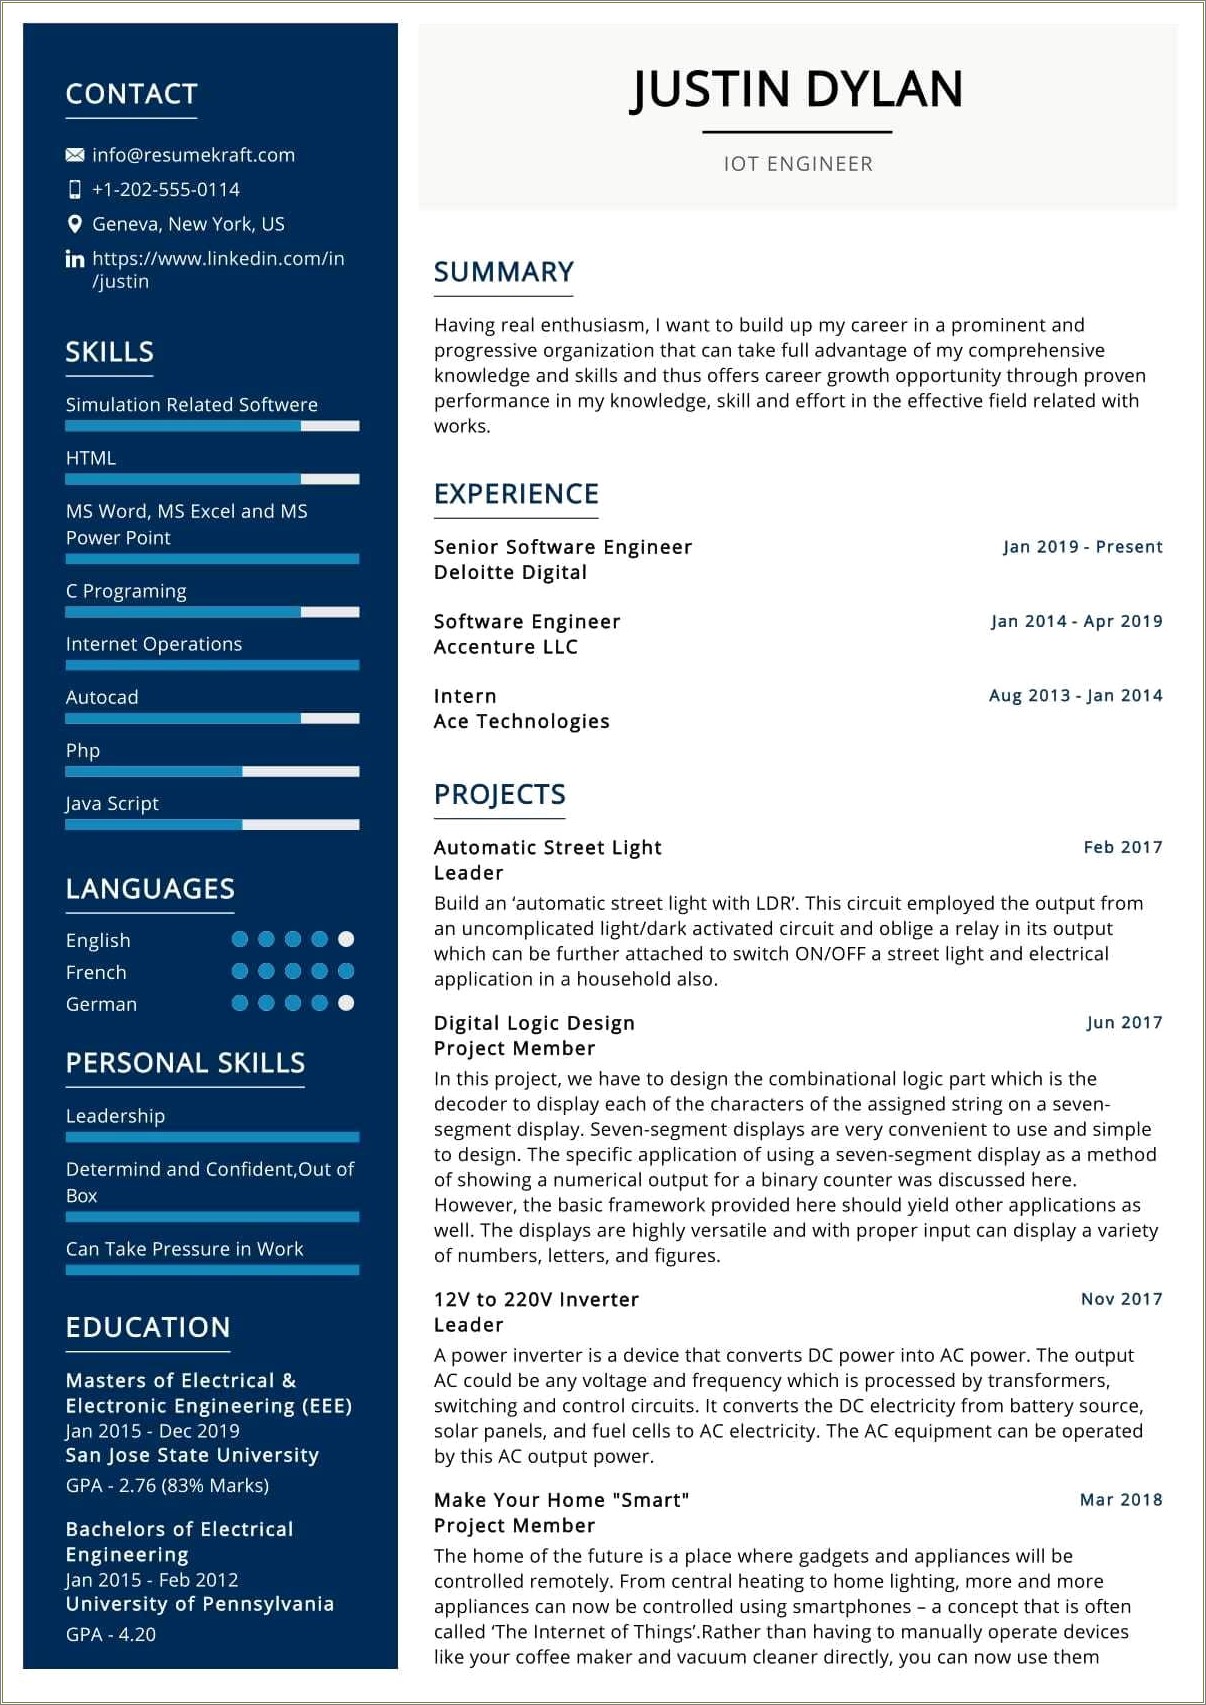 Best Resume Objective For Network Engineer